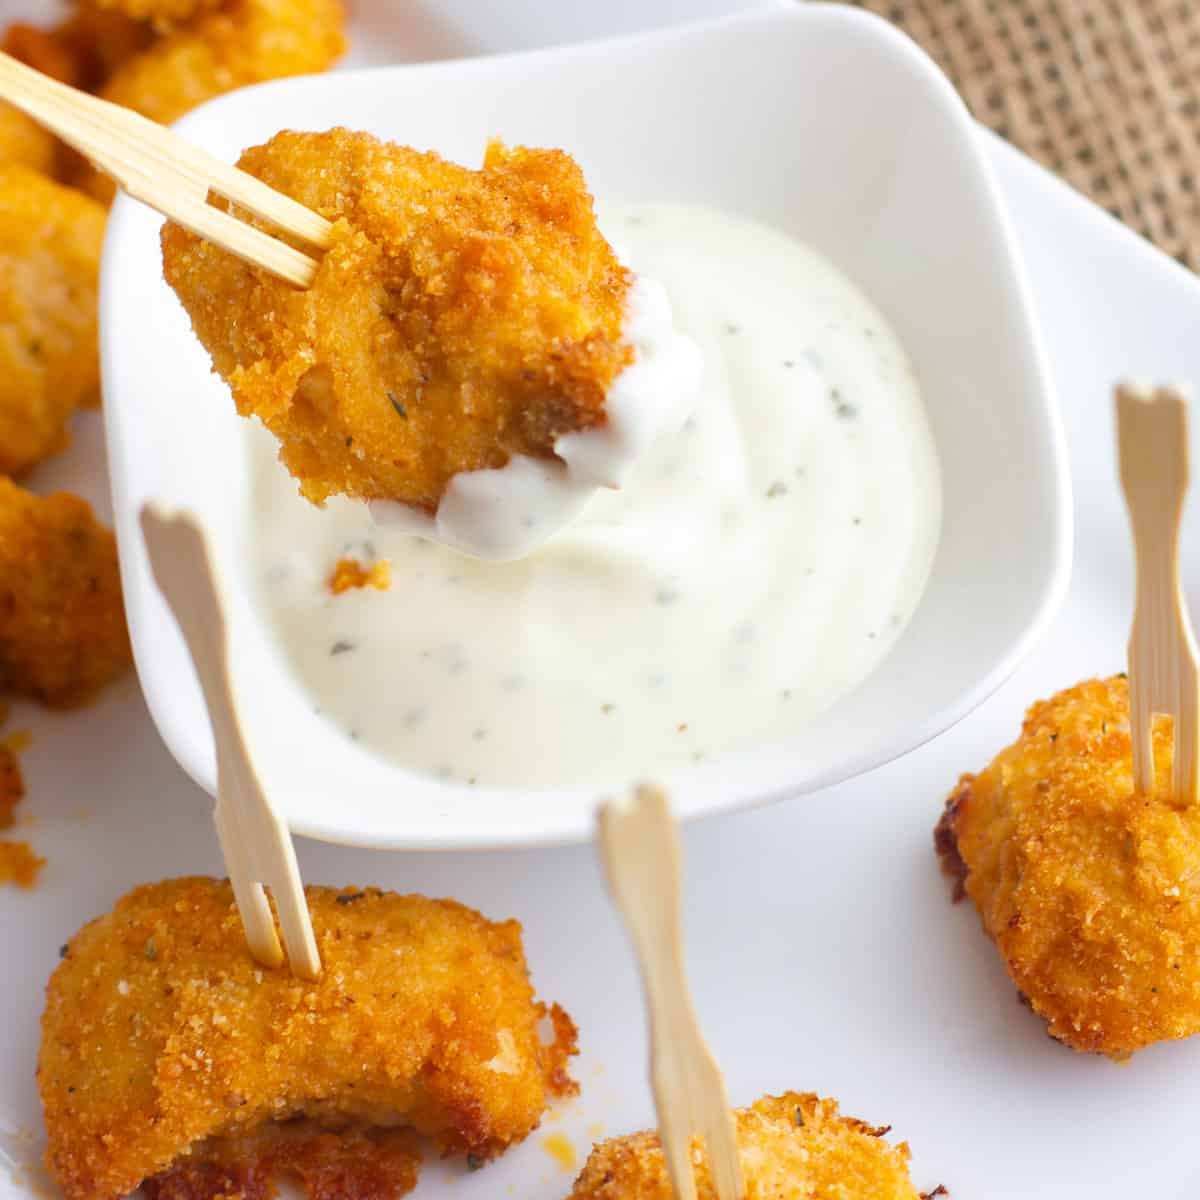 A nugget being dipped in ranch dressing.